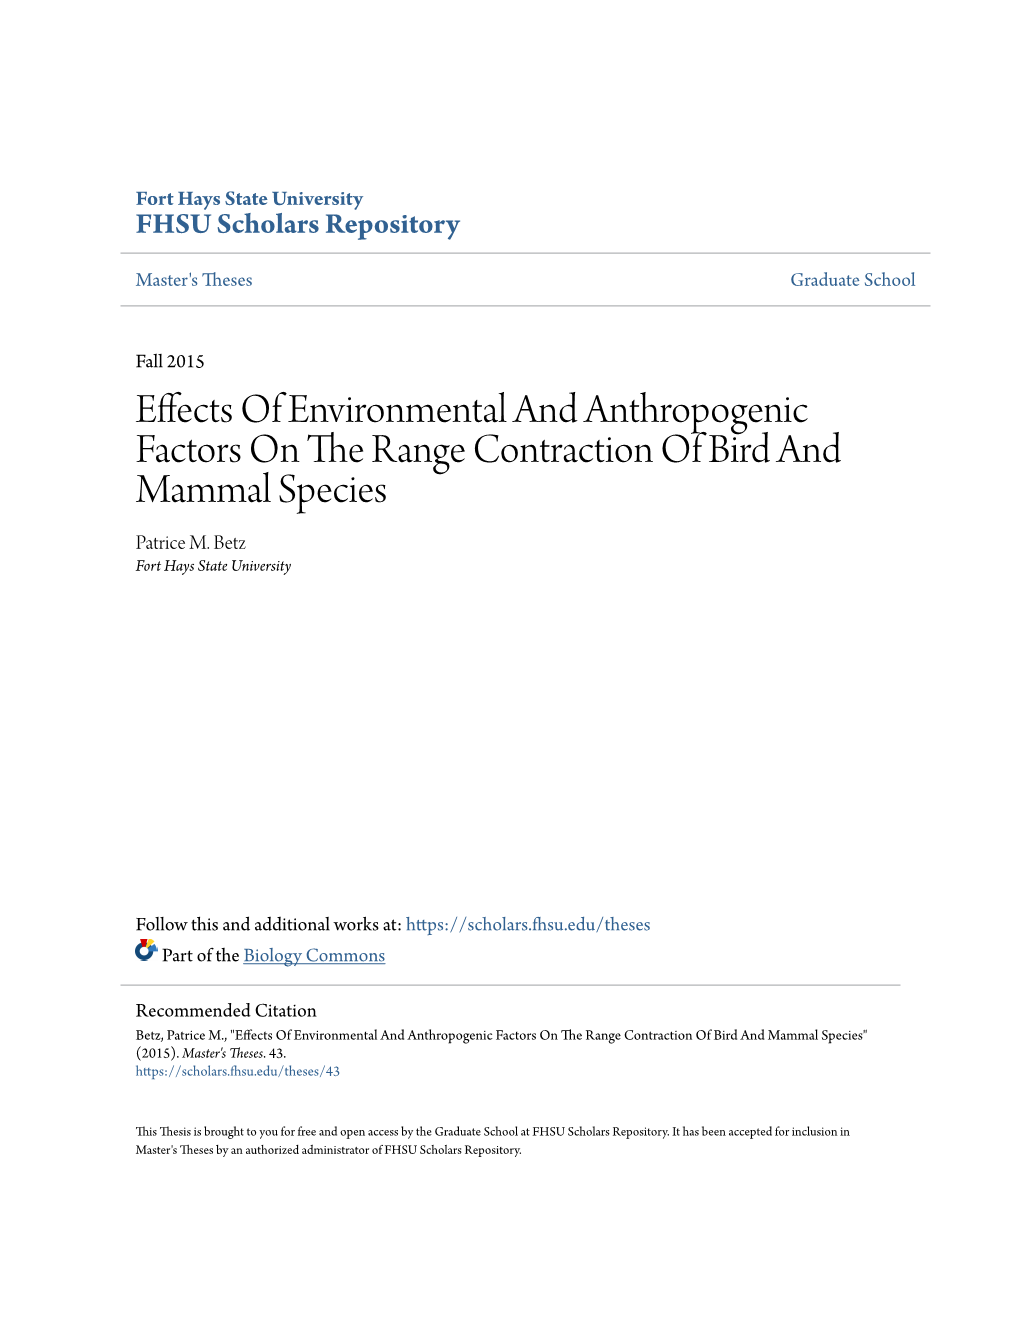 Effects of Environmental and Anthropogenic Factors on the Range Contraction of Bird and Mammal Species Patrice M